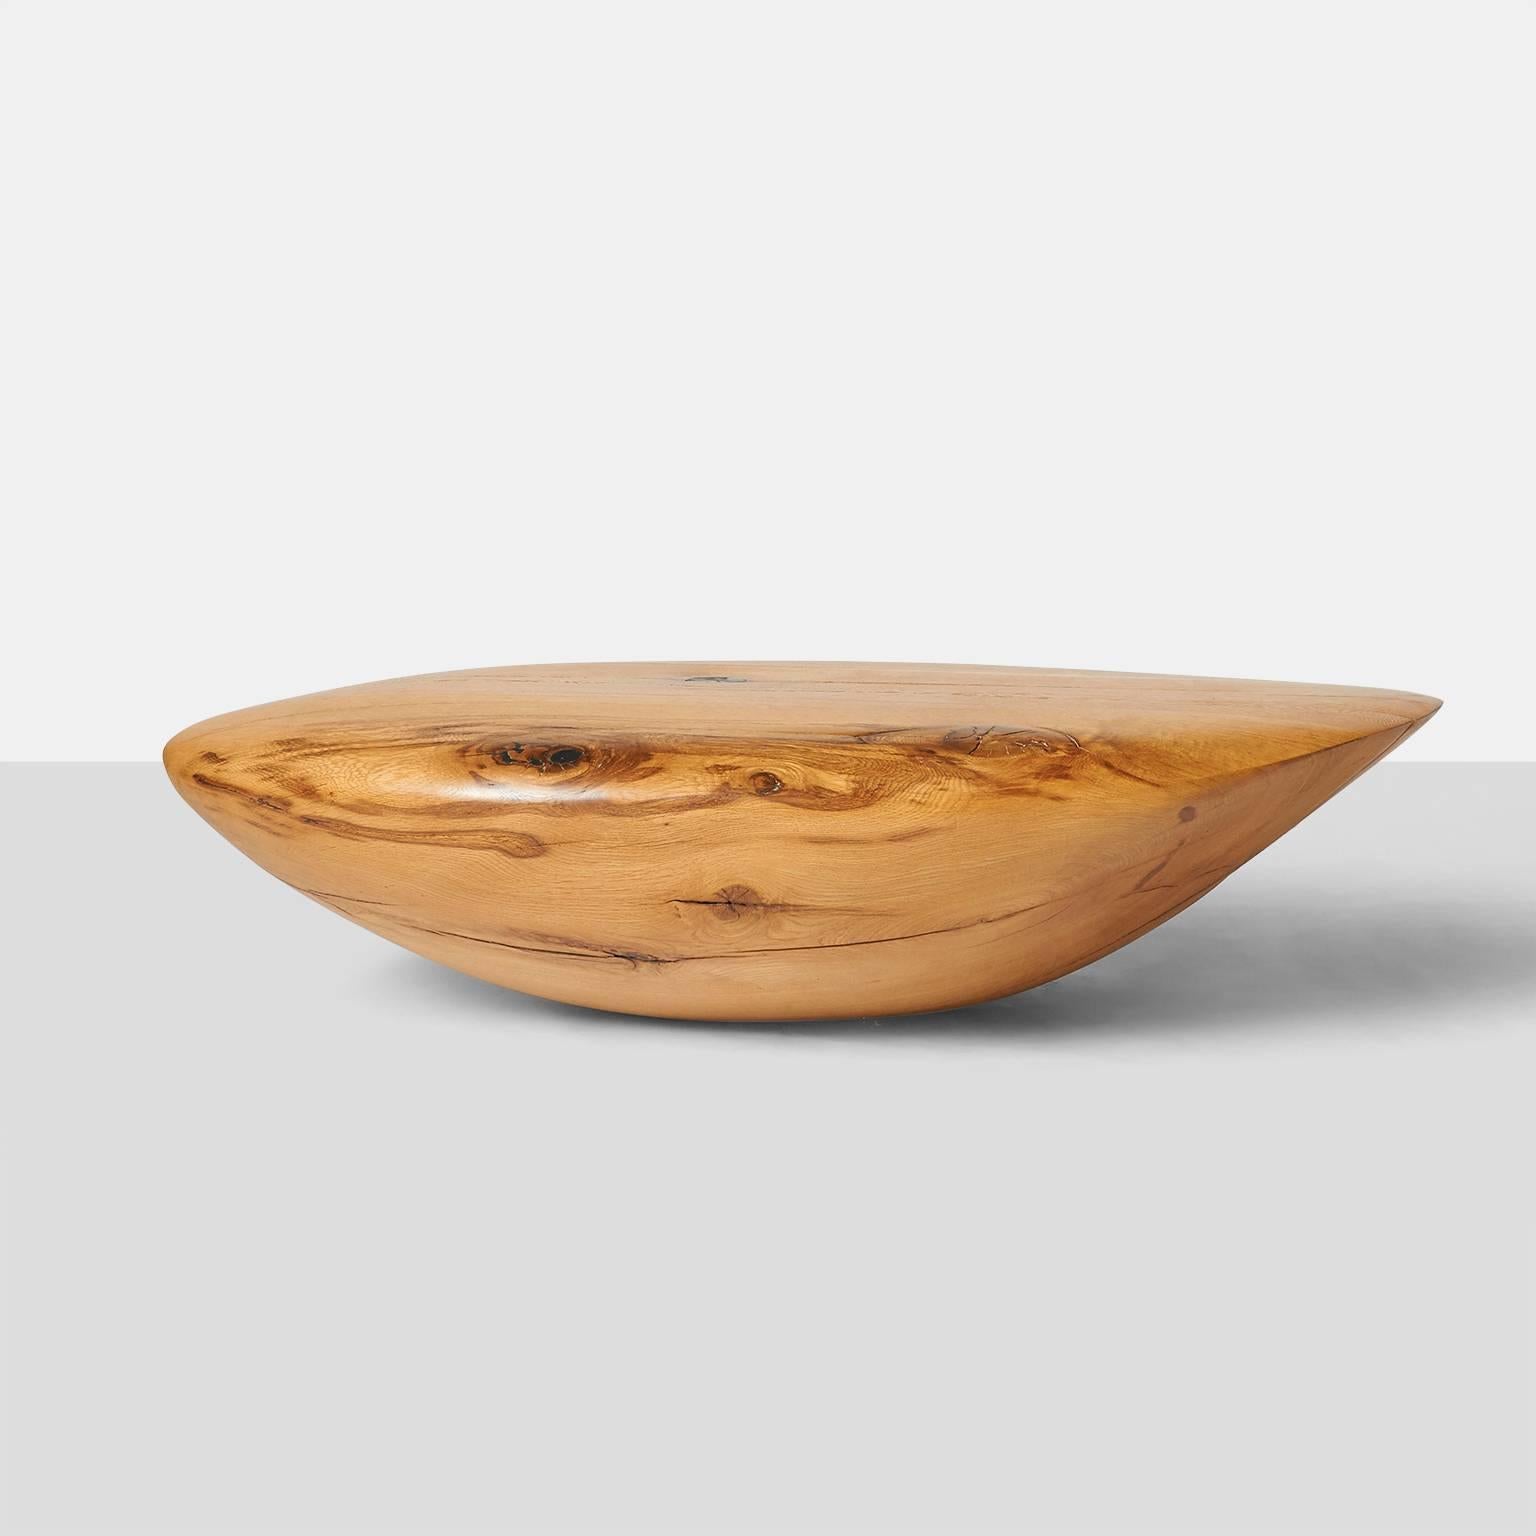 A large pebble shaped coffee table by German artist Kaspar Hamacher from the trunk of a solid piece of naturally fallen oak. 
Almond + Co. is the exclusive gallery selected to represent all work by Kaspar in the U.S.